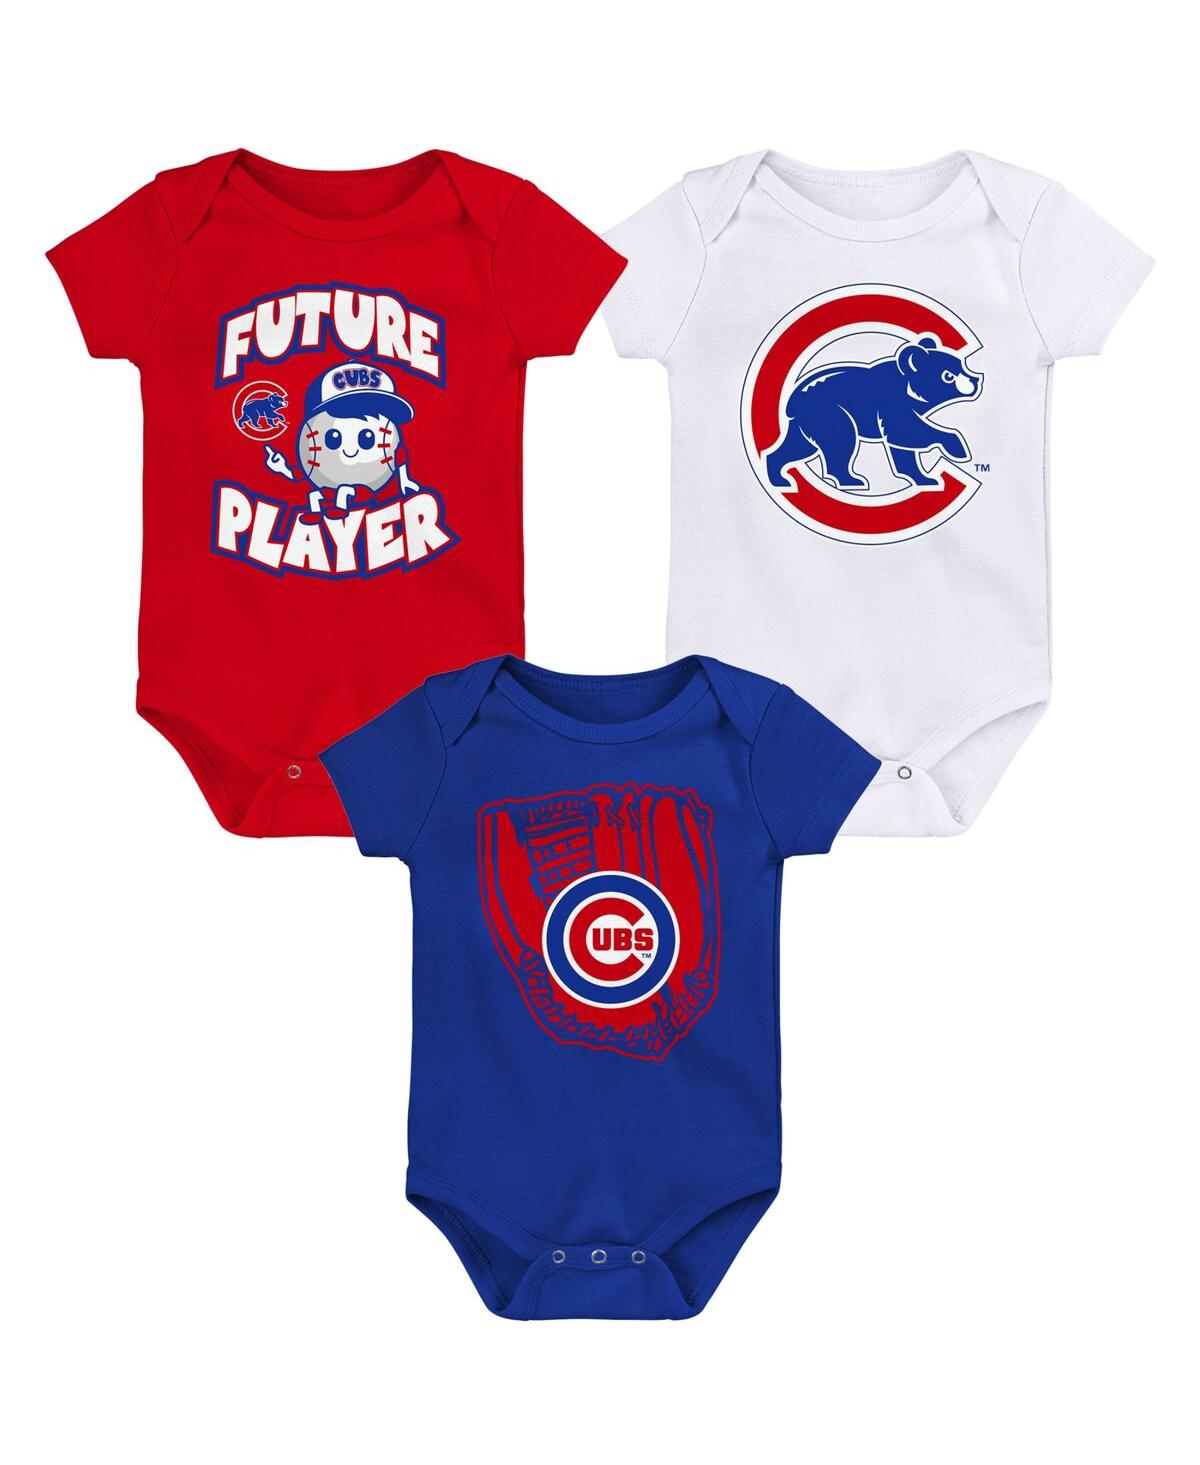 Shop Outerstuff Newborn And Infant Boys And Girls Royal, Red, White Chicago Cubs Minor League Player Three-pack Body In Royal,red,white